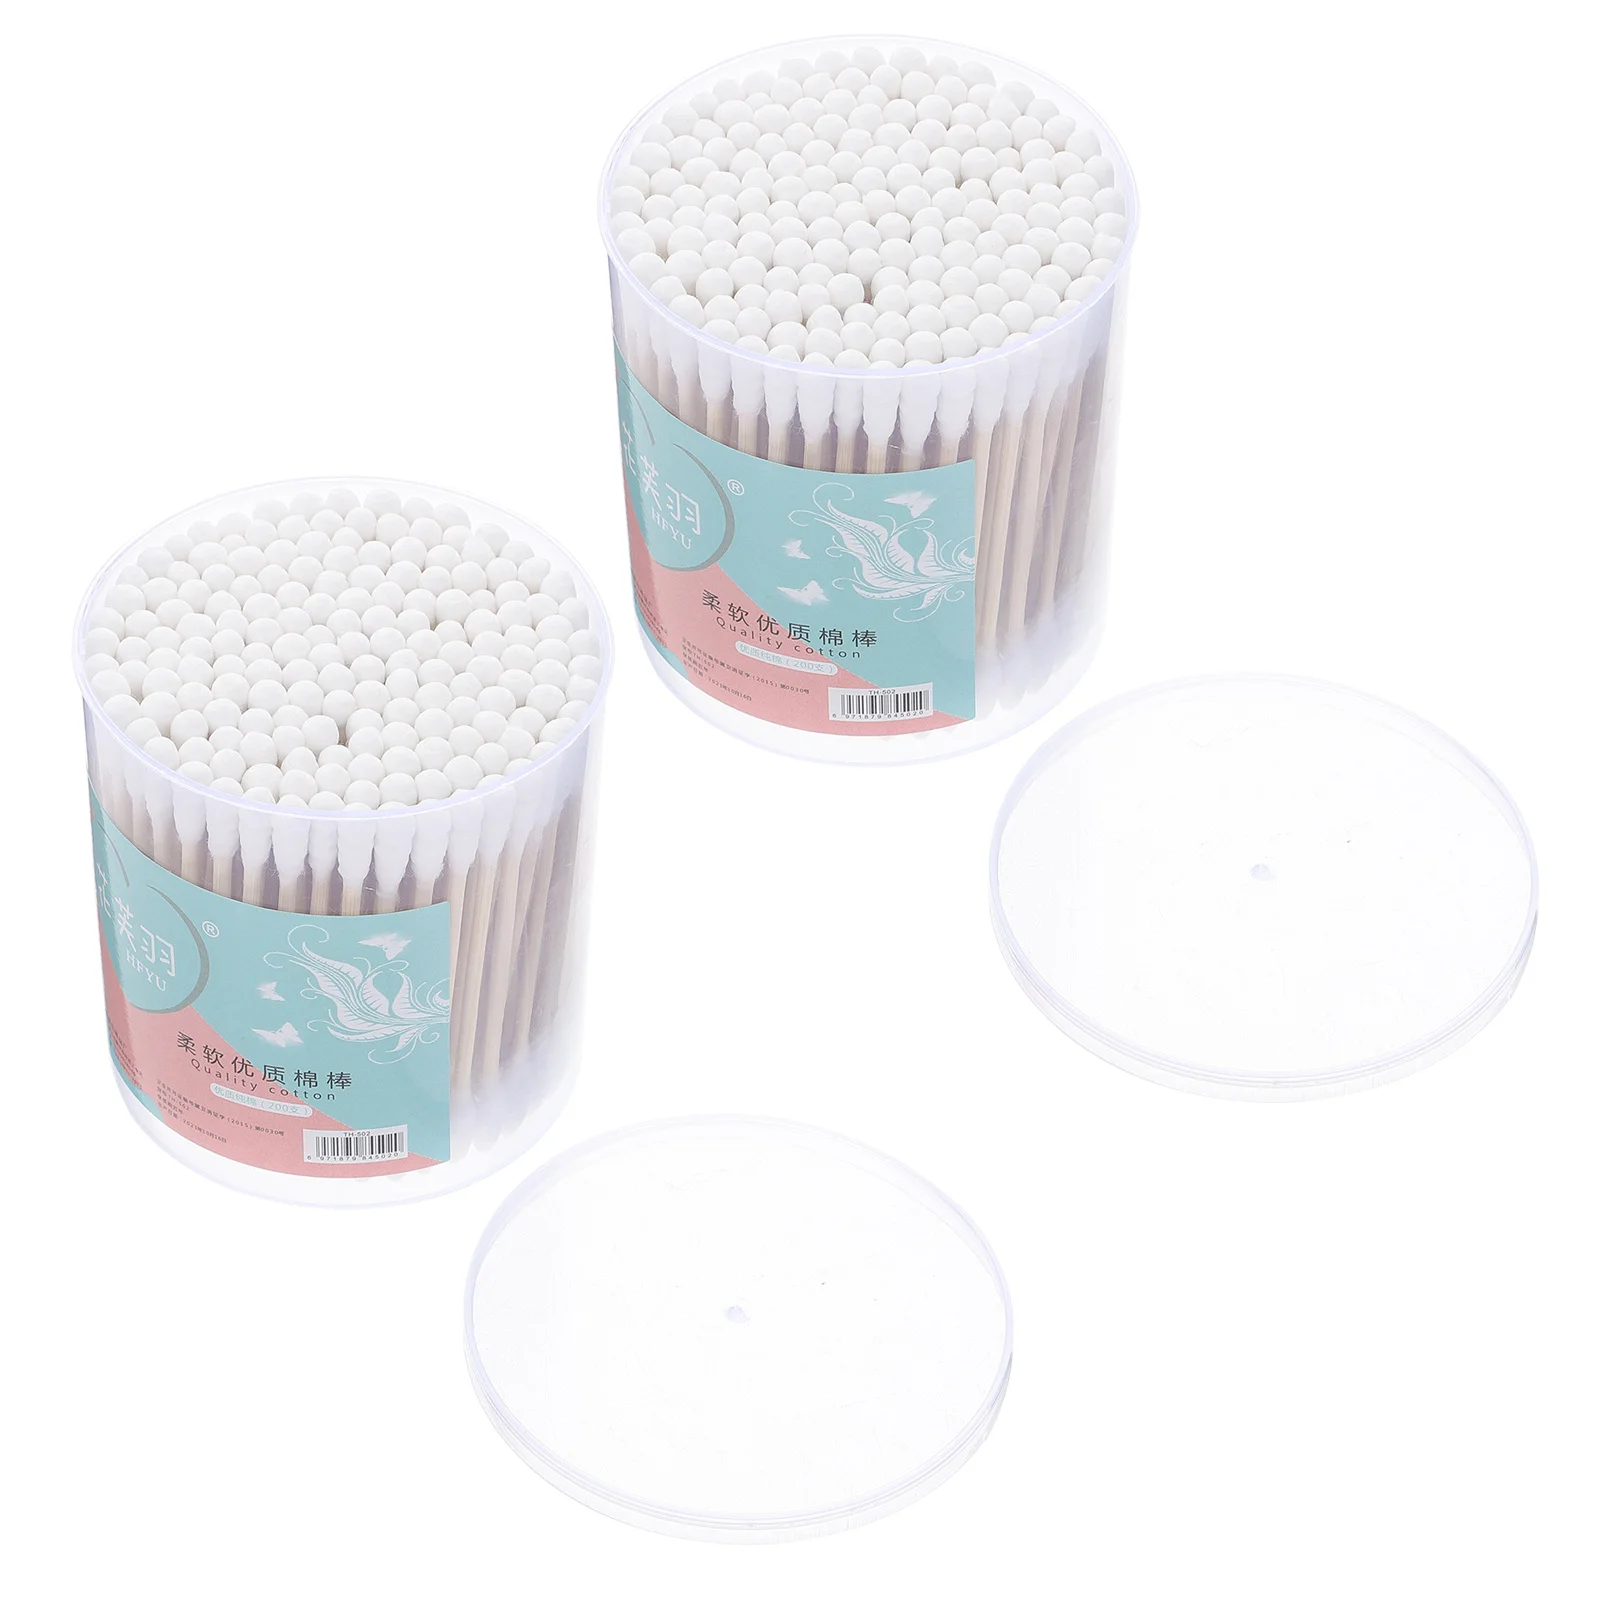 Baby Cotton Swabs 2 Box 400Pcs Baby Safety Swabs Double Spiral Tips Cotton Swabs Paper Sticks Natural Cotton Buds Ear q tips organic cotton swabs 400 swabs